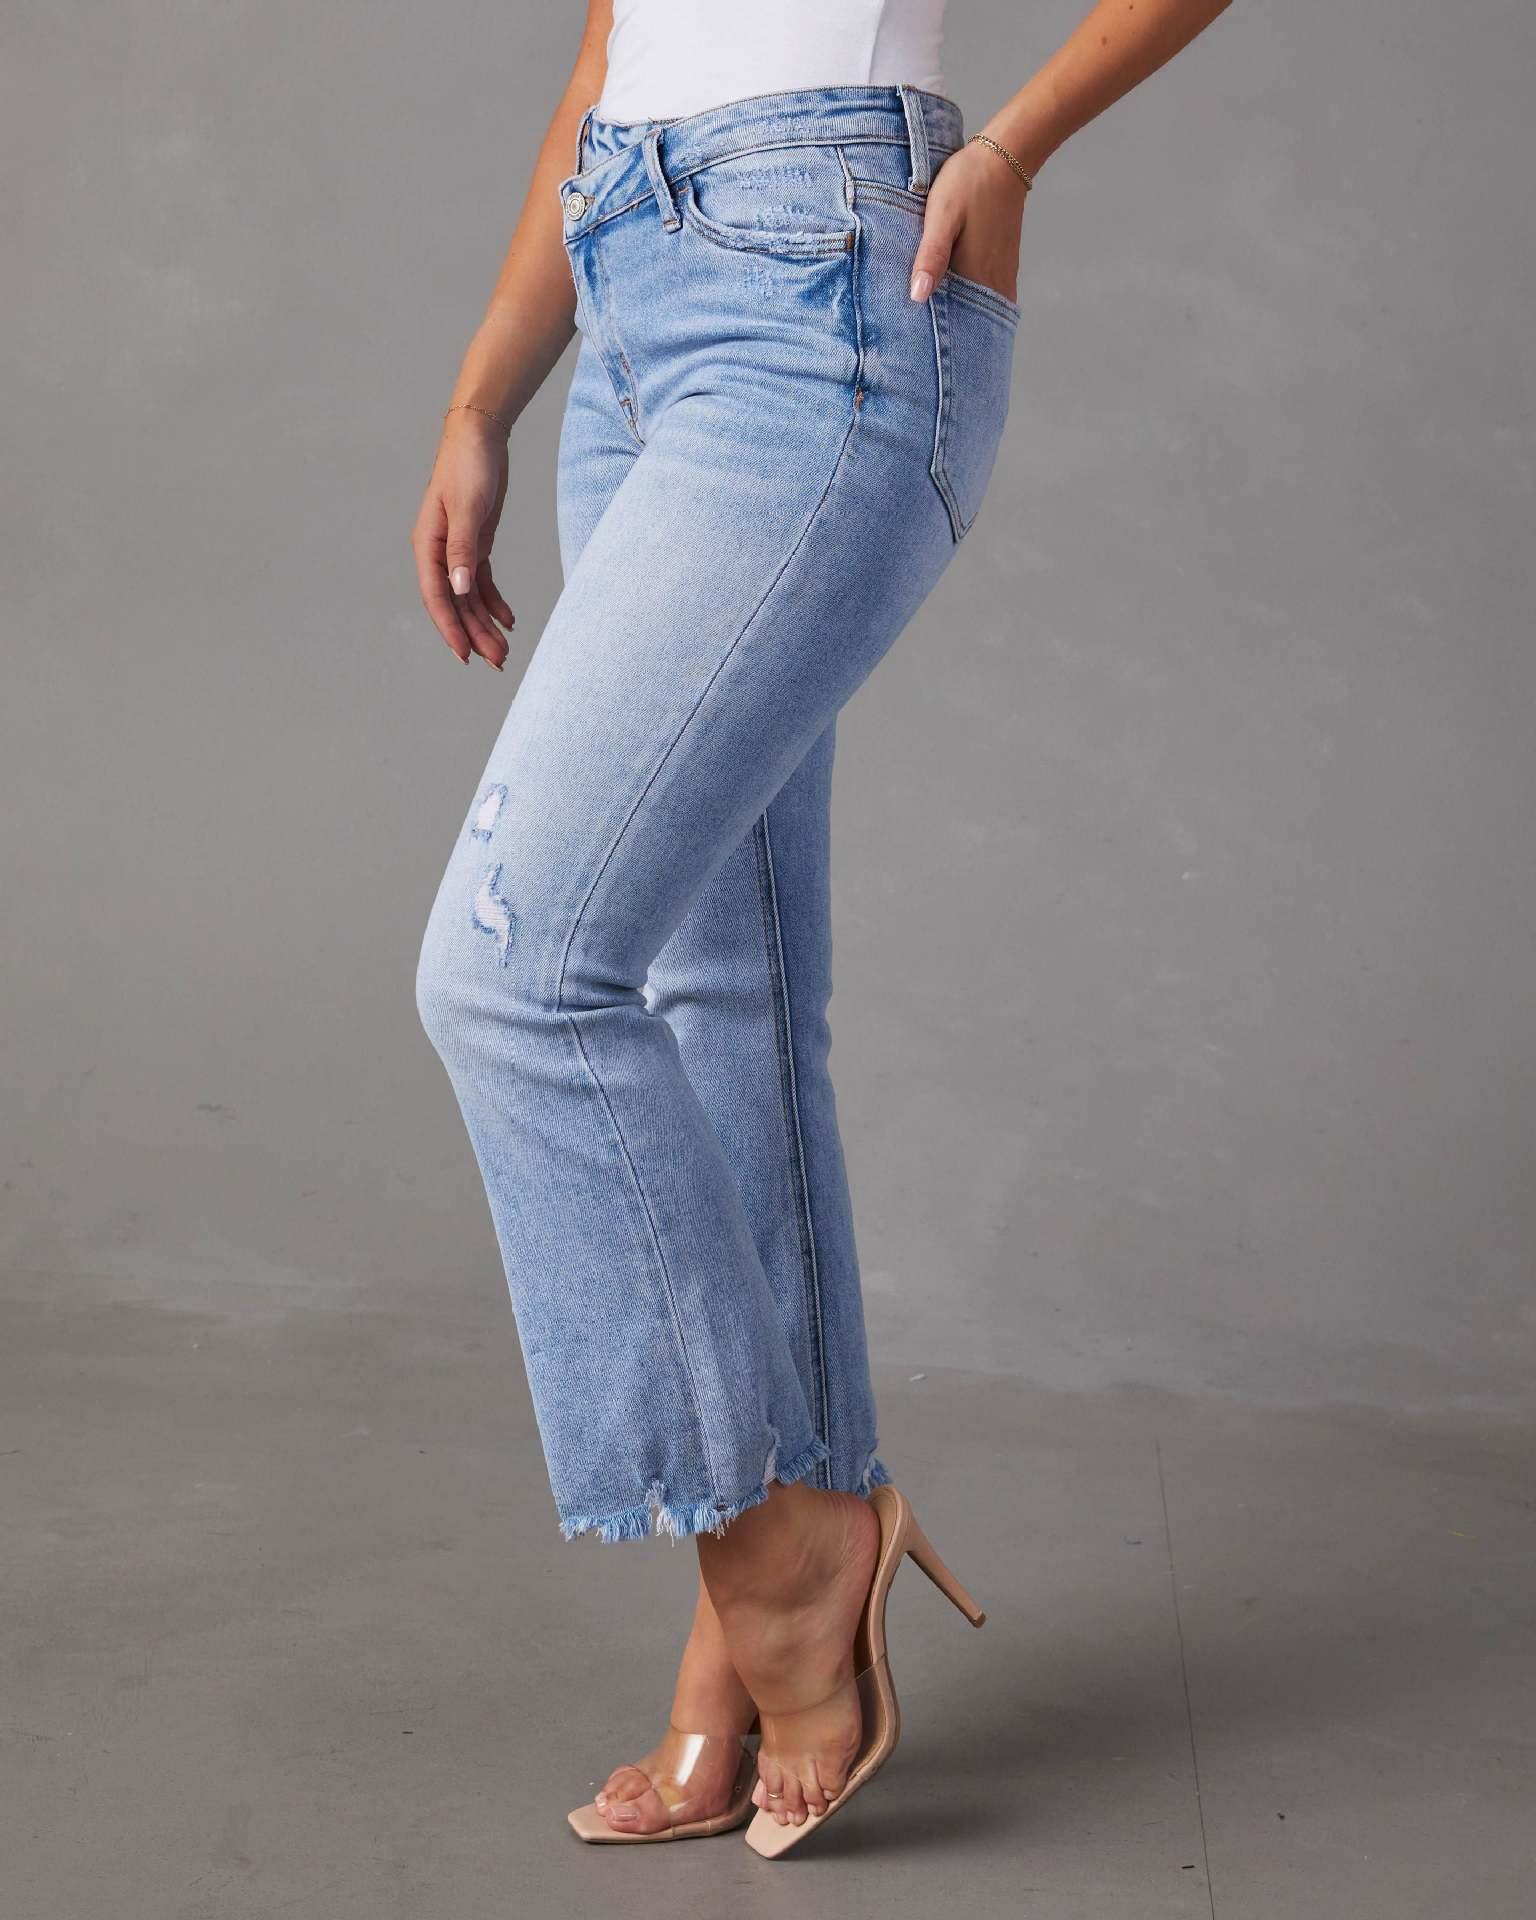 Fashion Wash Jeans For Women - FASHION - Your-Look